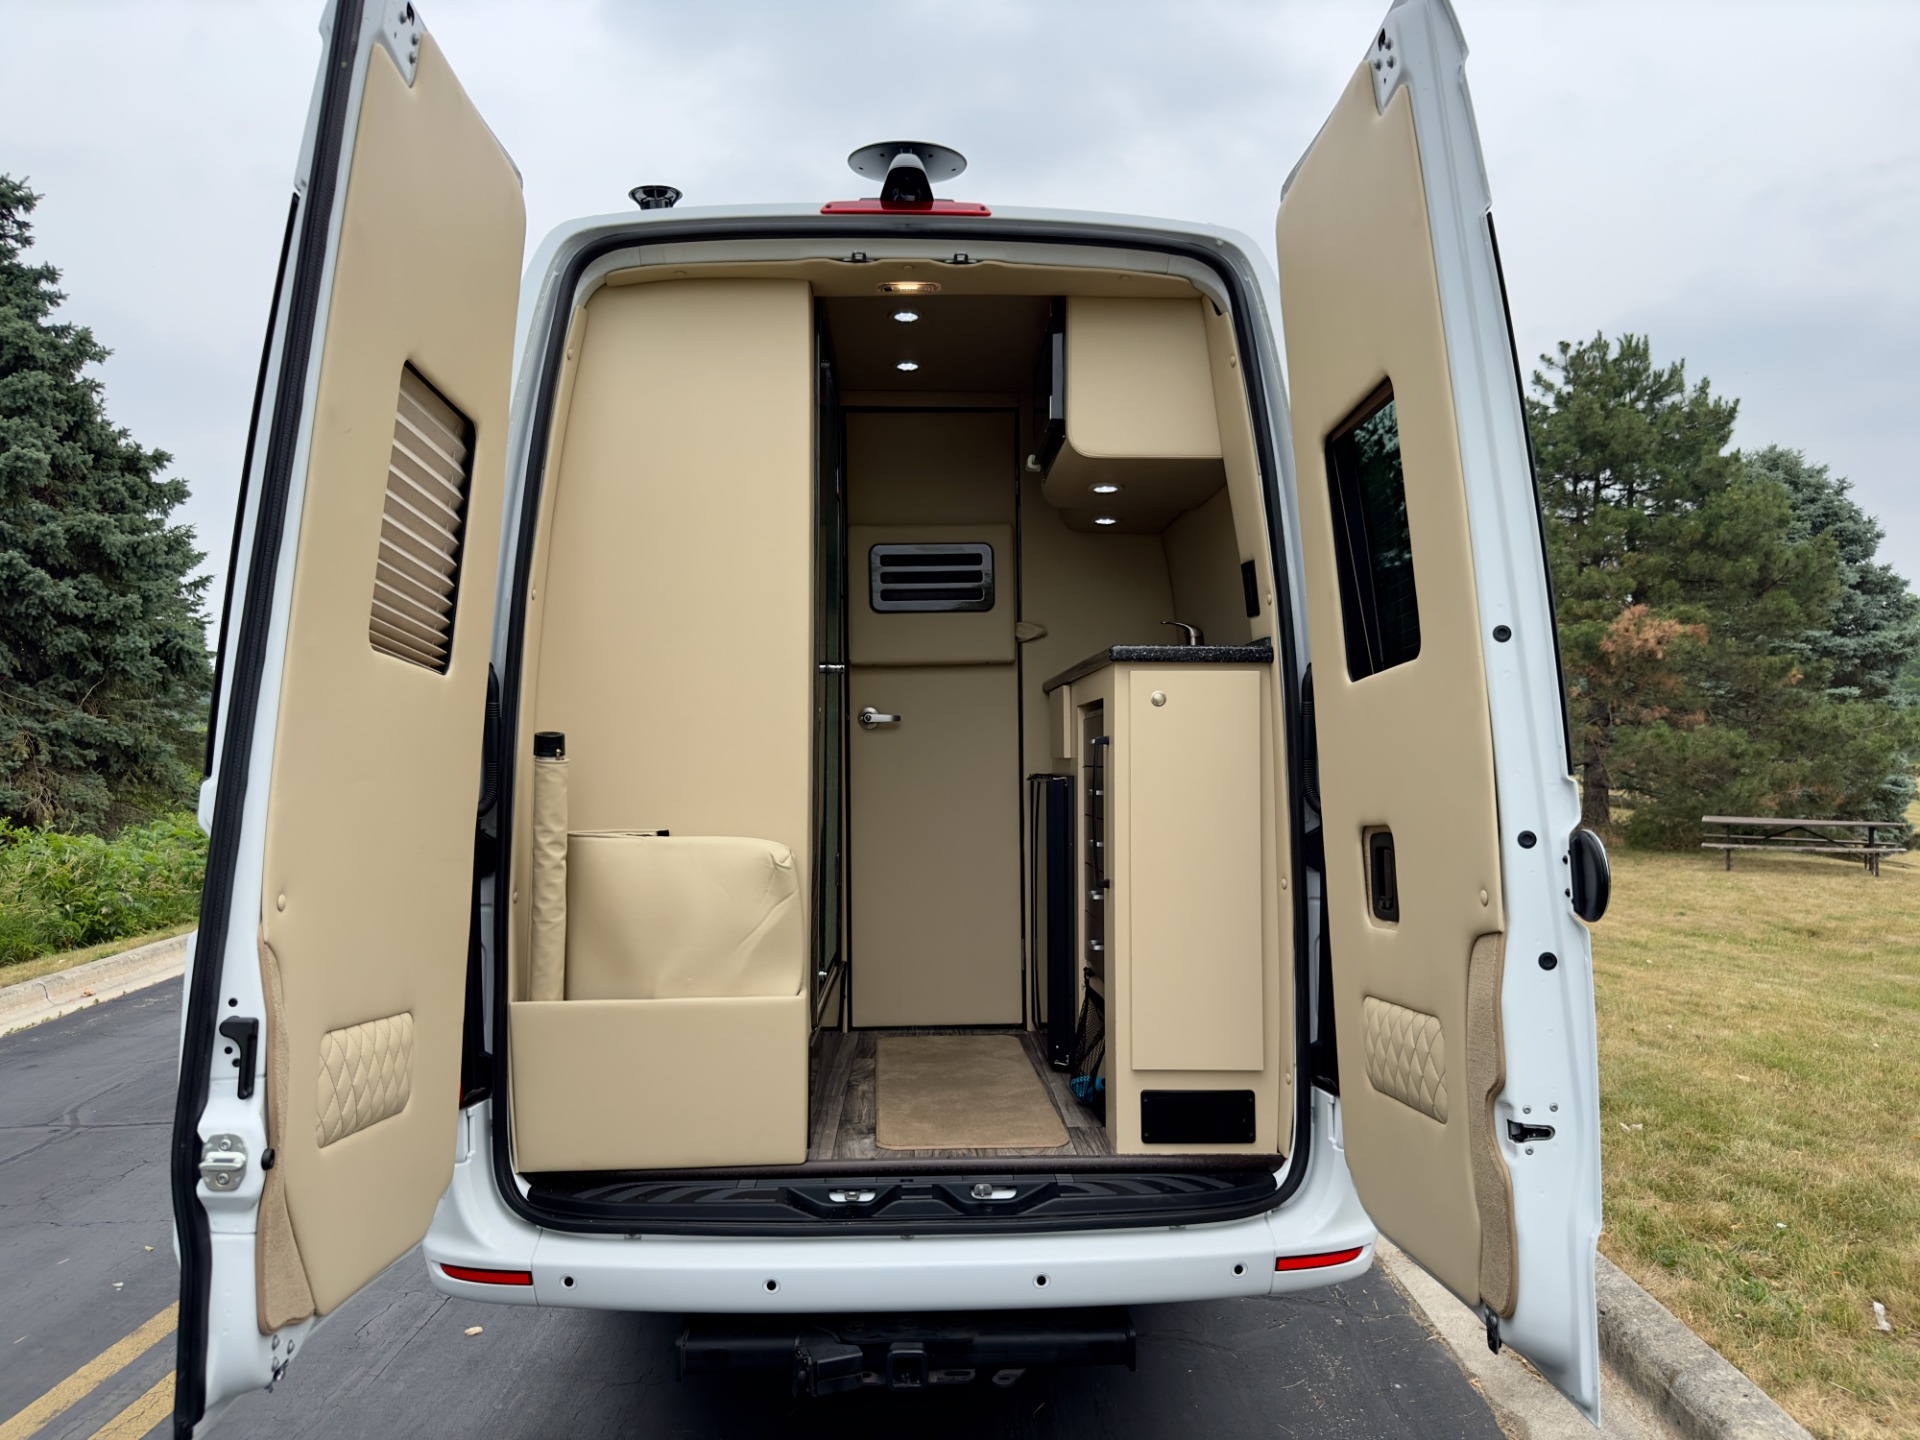 With Bathroom, Galley, and Bed, Ultimate Toys' Luxury Sprinter Vans Offer  Crucial Protection and Utility